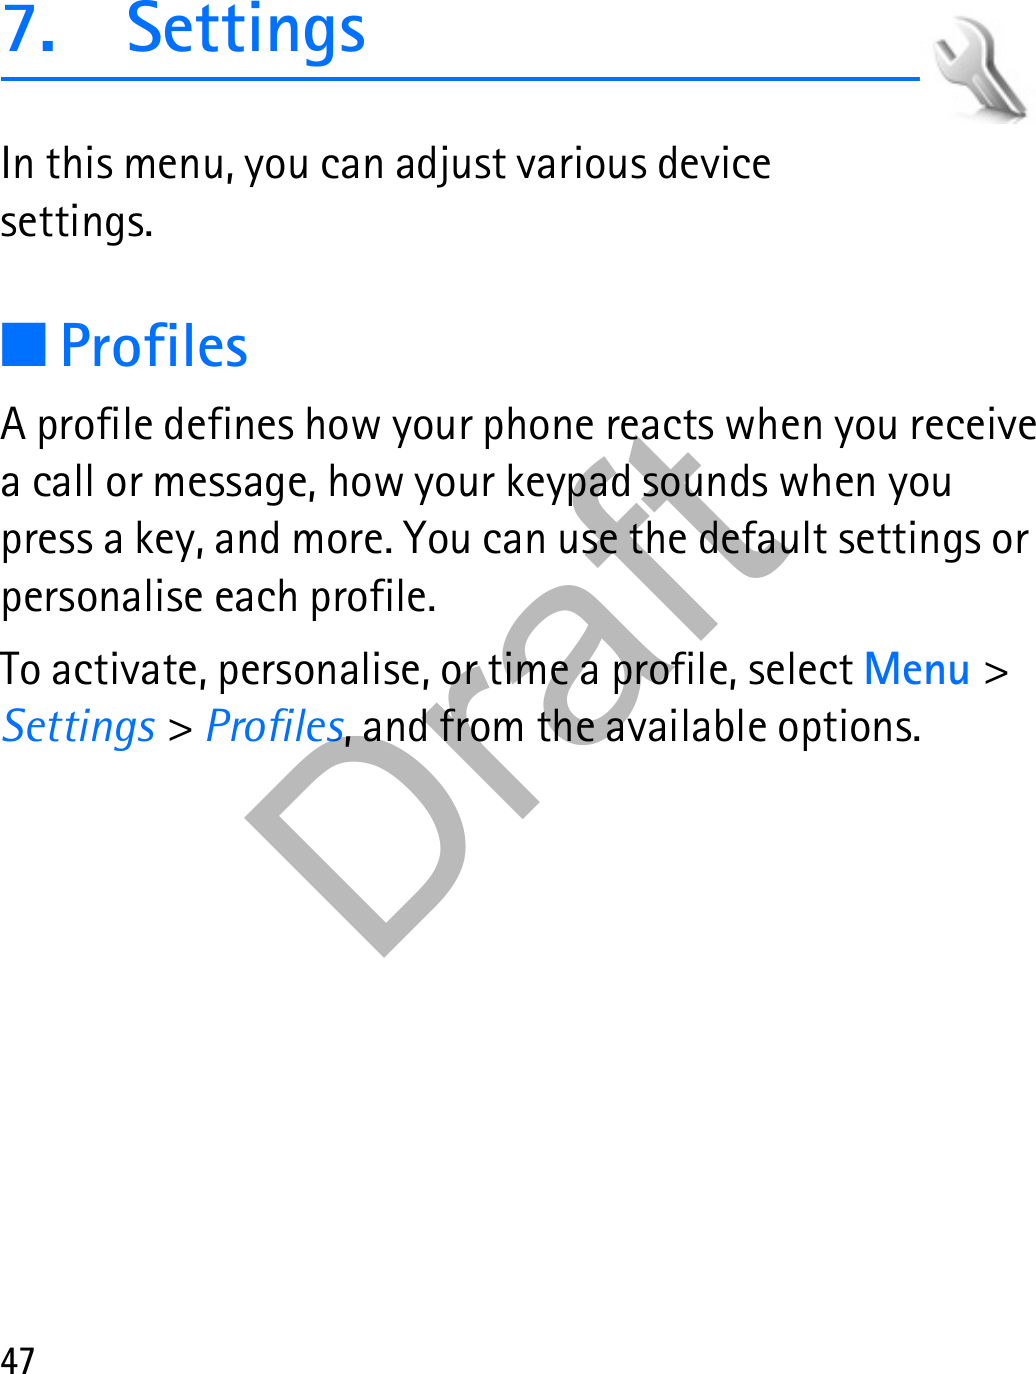 477. SettingsIn this menu, you can adjust various device settings.■ProfilesA profile defines how your phone reacts when you receive a call or message, how your keypad sounds when you press a key, and more. You can use the default settings or personalise each profile.To activate, personalise, or time a profile, select Menu &gt; Settings &gt; Profiles, and from the available options.Draft